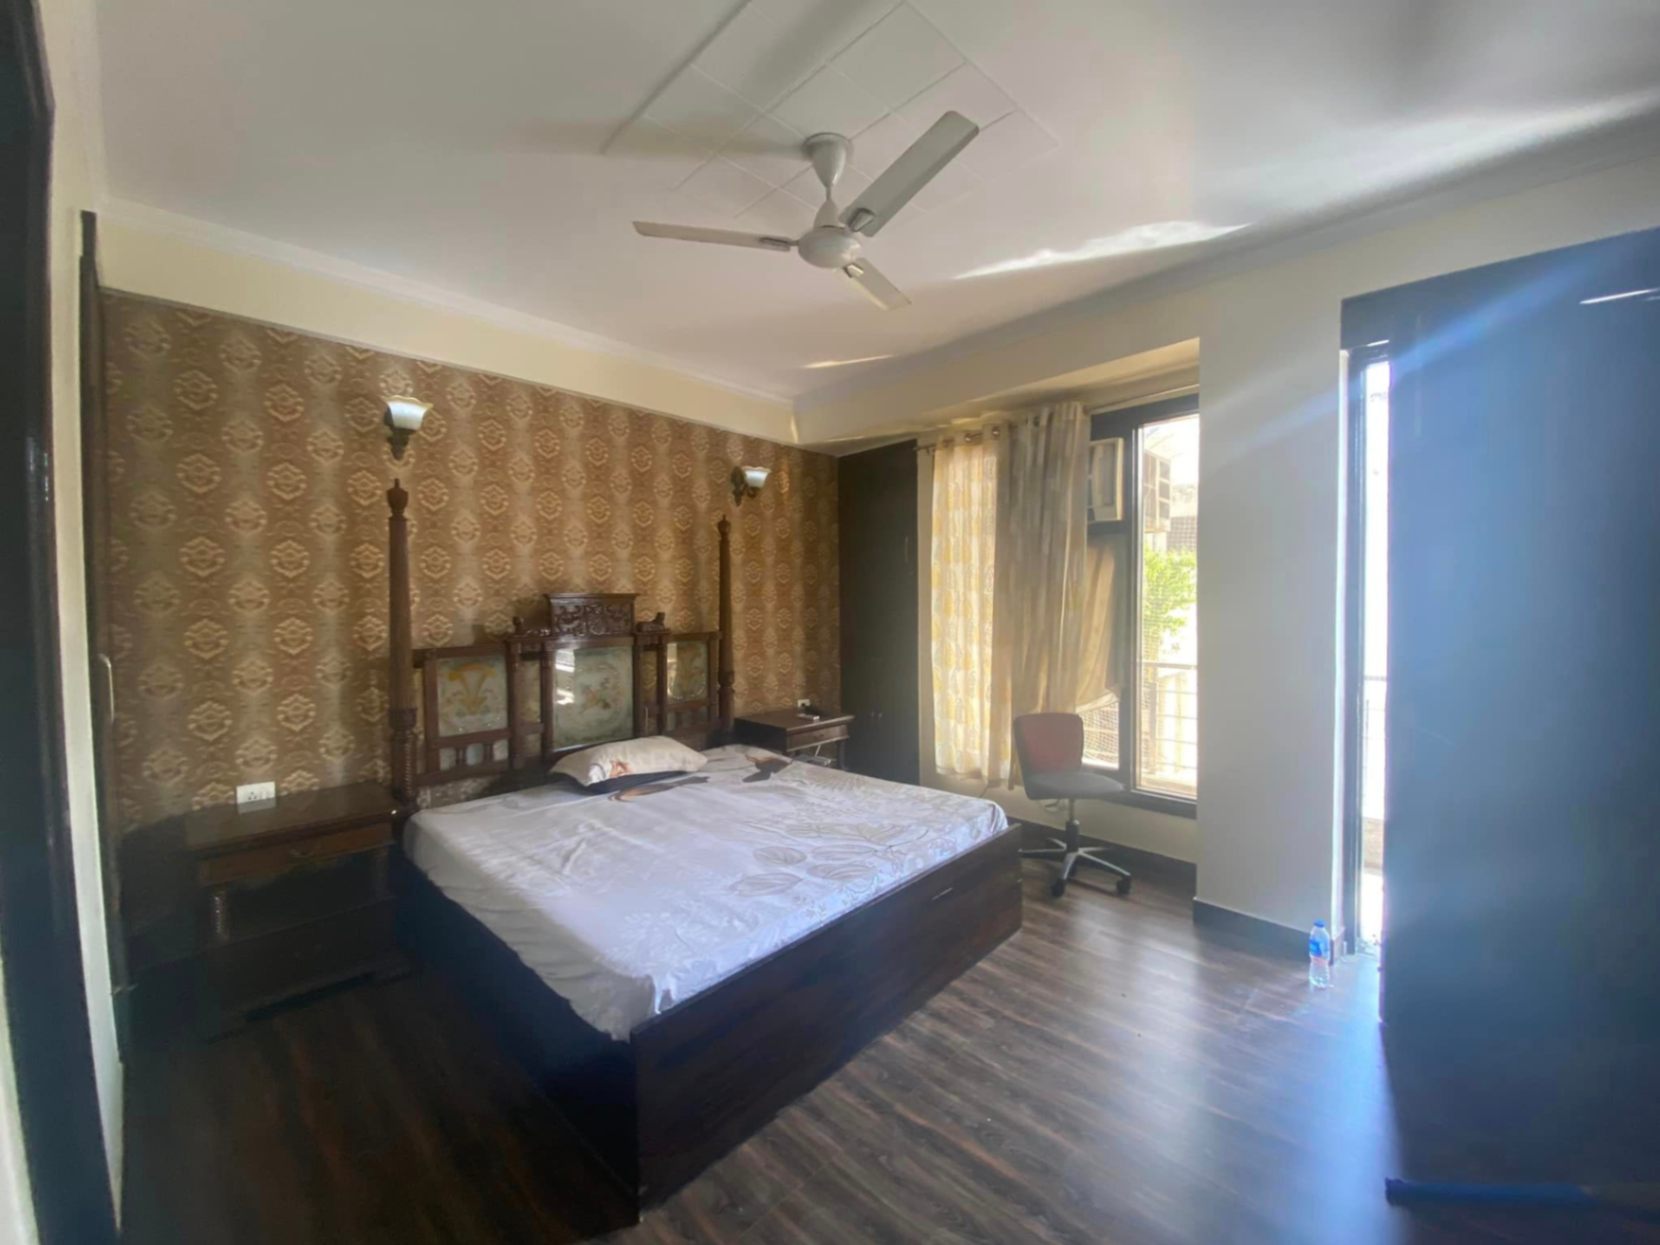 3 Bed/ 3 Bath Rent Apartment/ Flat, Furnished for rent @Chatterpur enclave phase 2 New Delhi